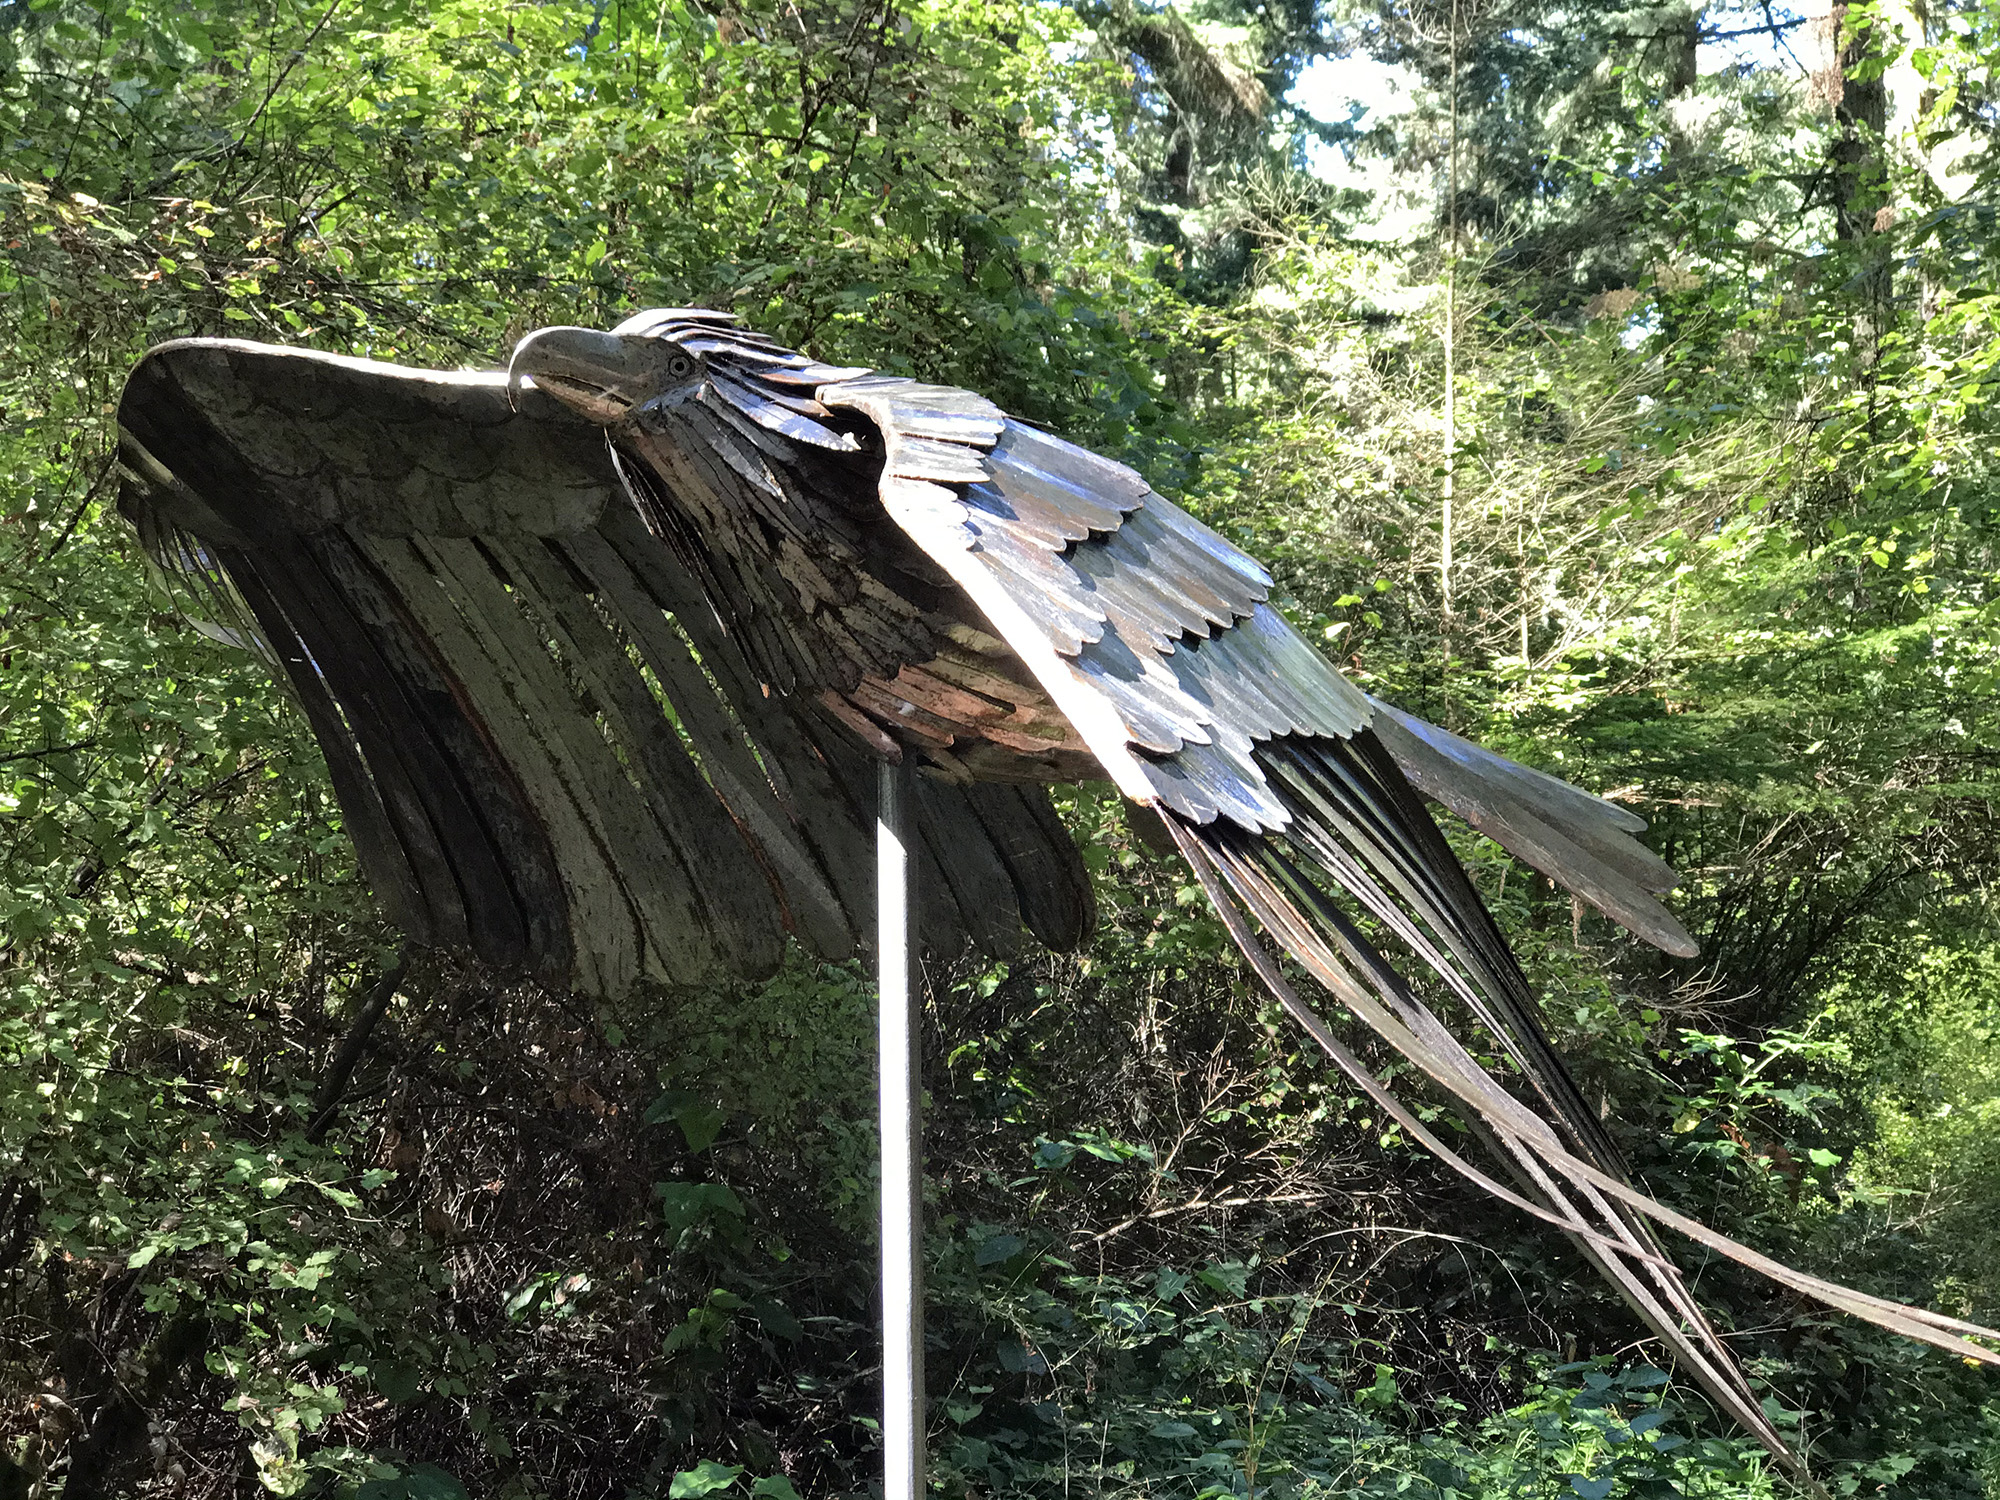 Sculptor Greg Neal sculpture Soaring Eagle in memory of Pam Young at Price Sculpture Forest park Coupeville Whidbey Island